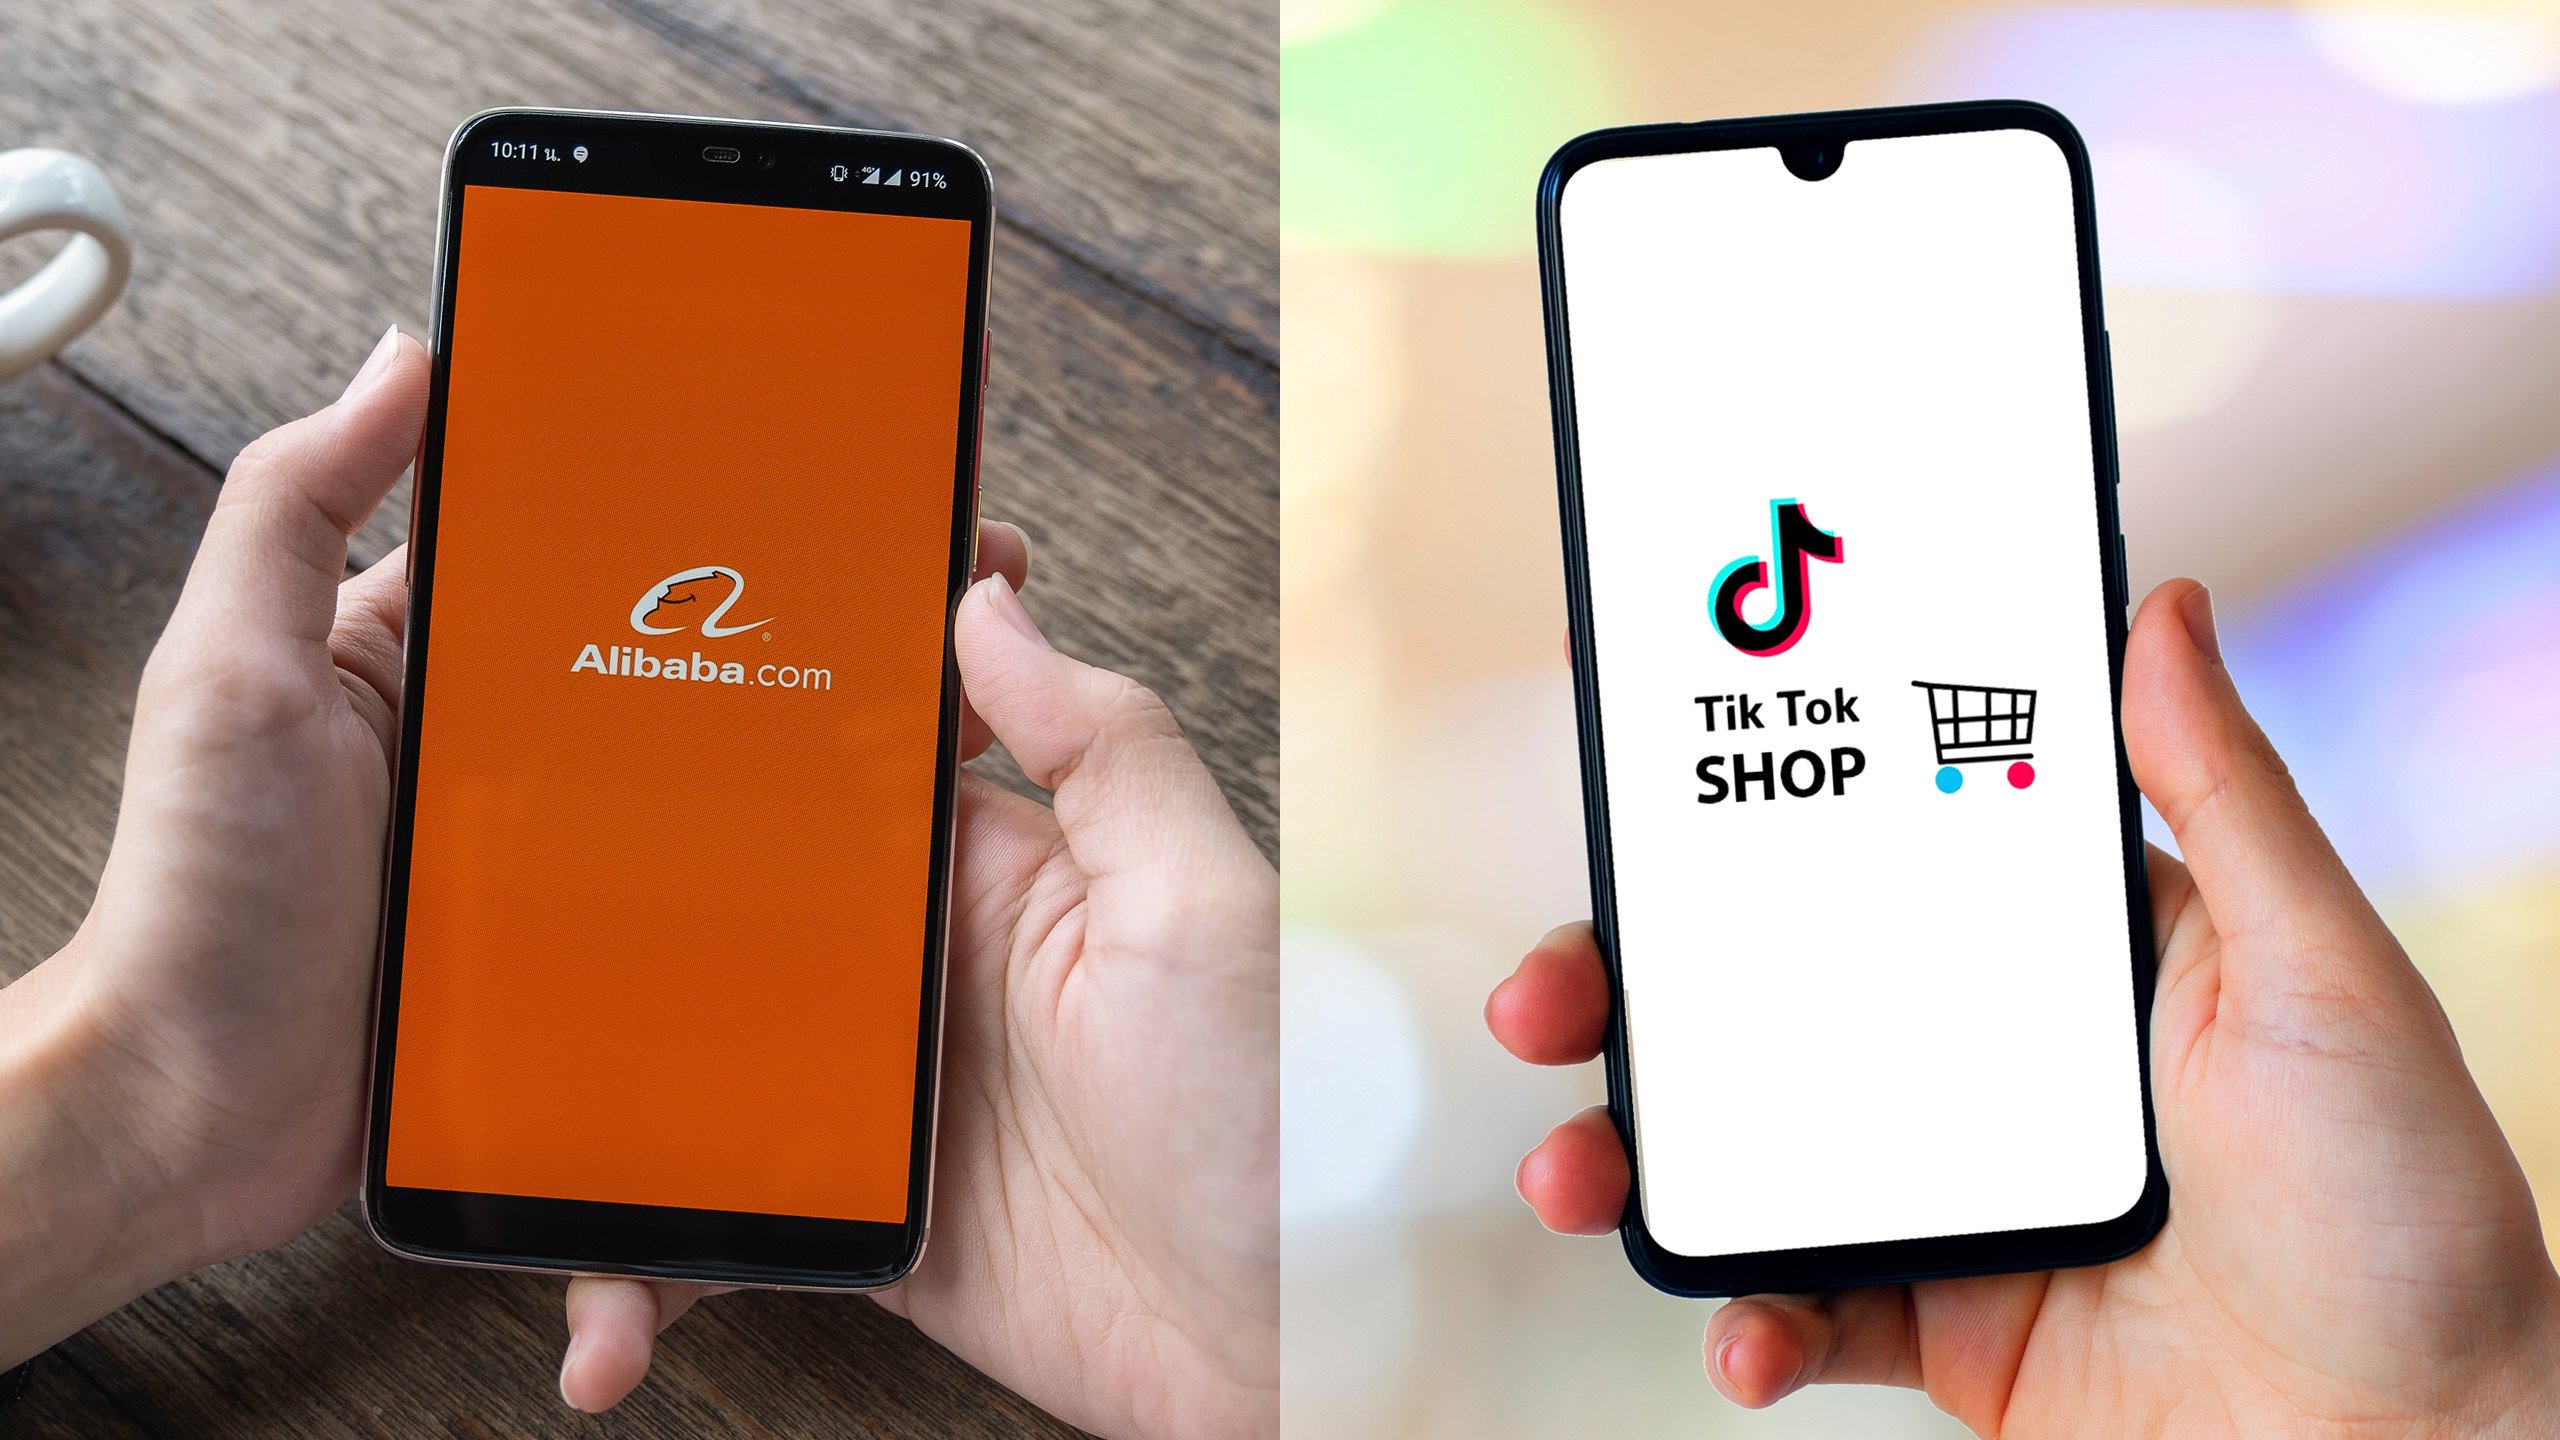 At the recent CES trade show in Las Vegas, Alibaba.com and TikTok Shop focused on their respective strengths in artificial intelligence and live-streaming e-commerce. Photos: Shutterstock